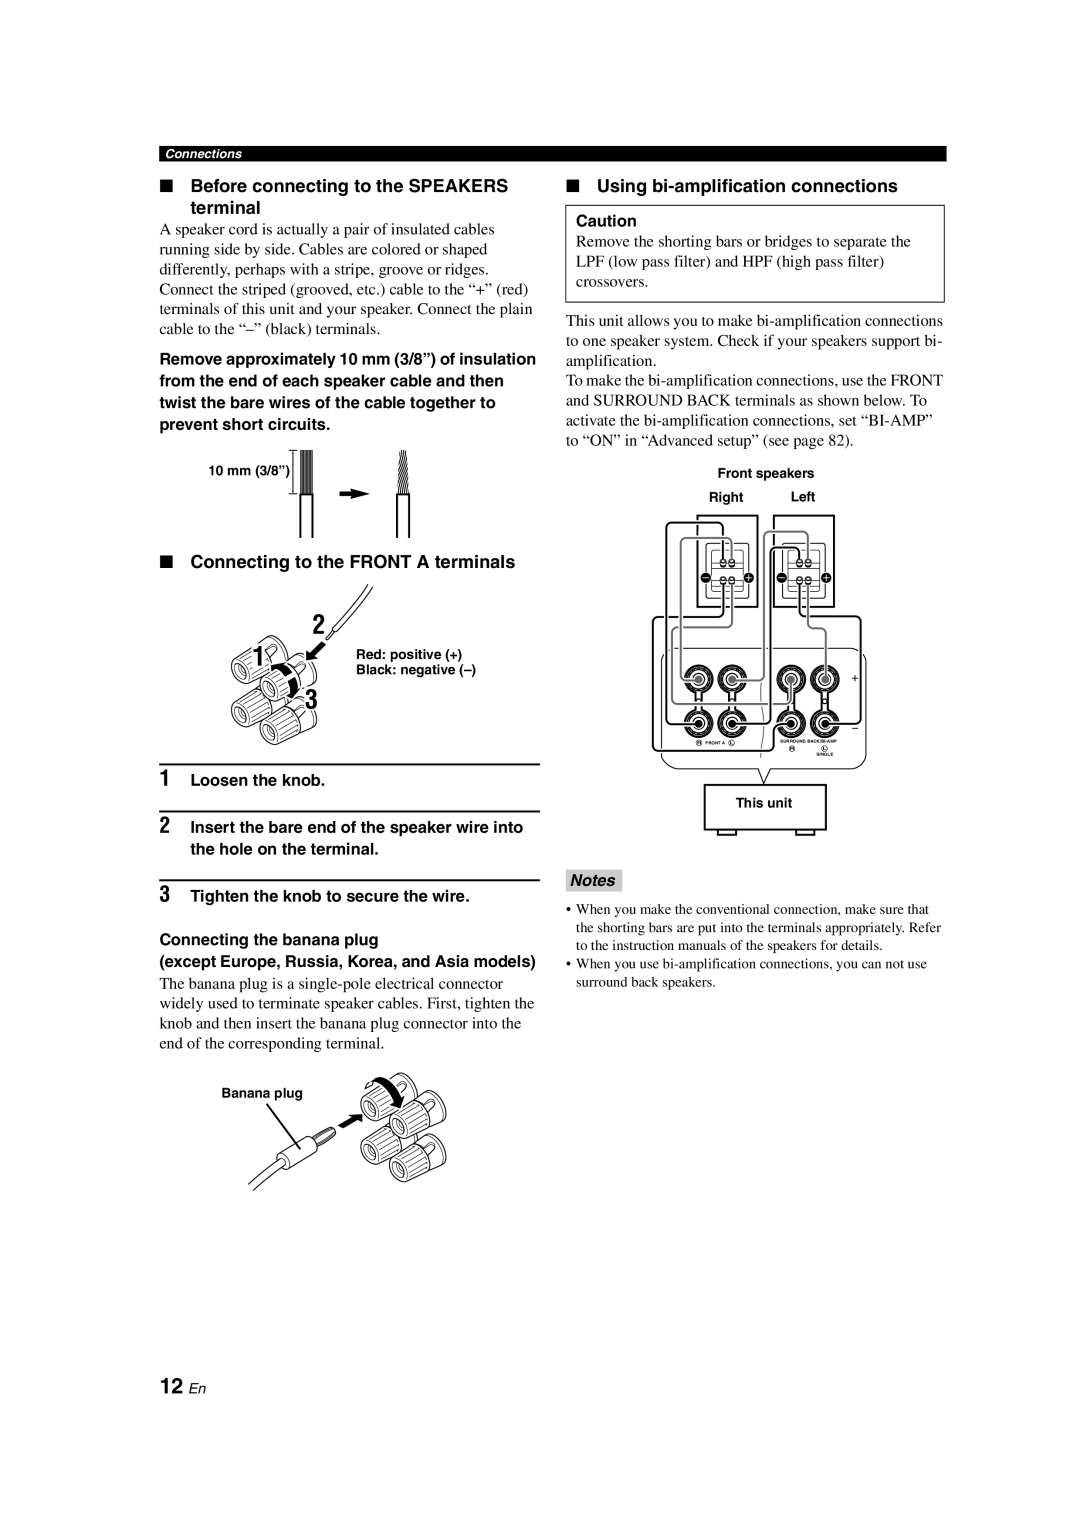 Yamaha HTR-6150 owner manual 12 En, Before connecting to the SPEAKERS terminal, Connecting to the FRONT A terminals, Notes 